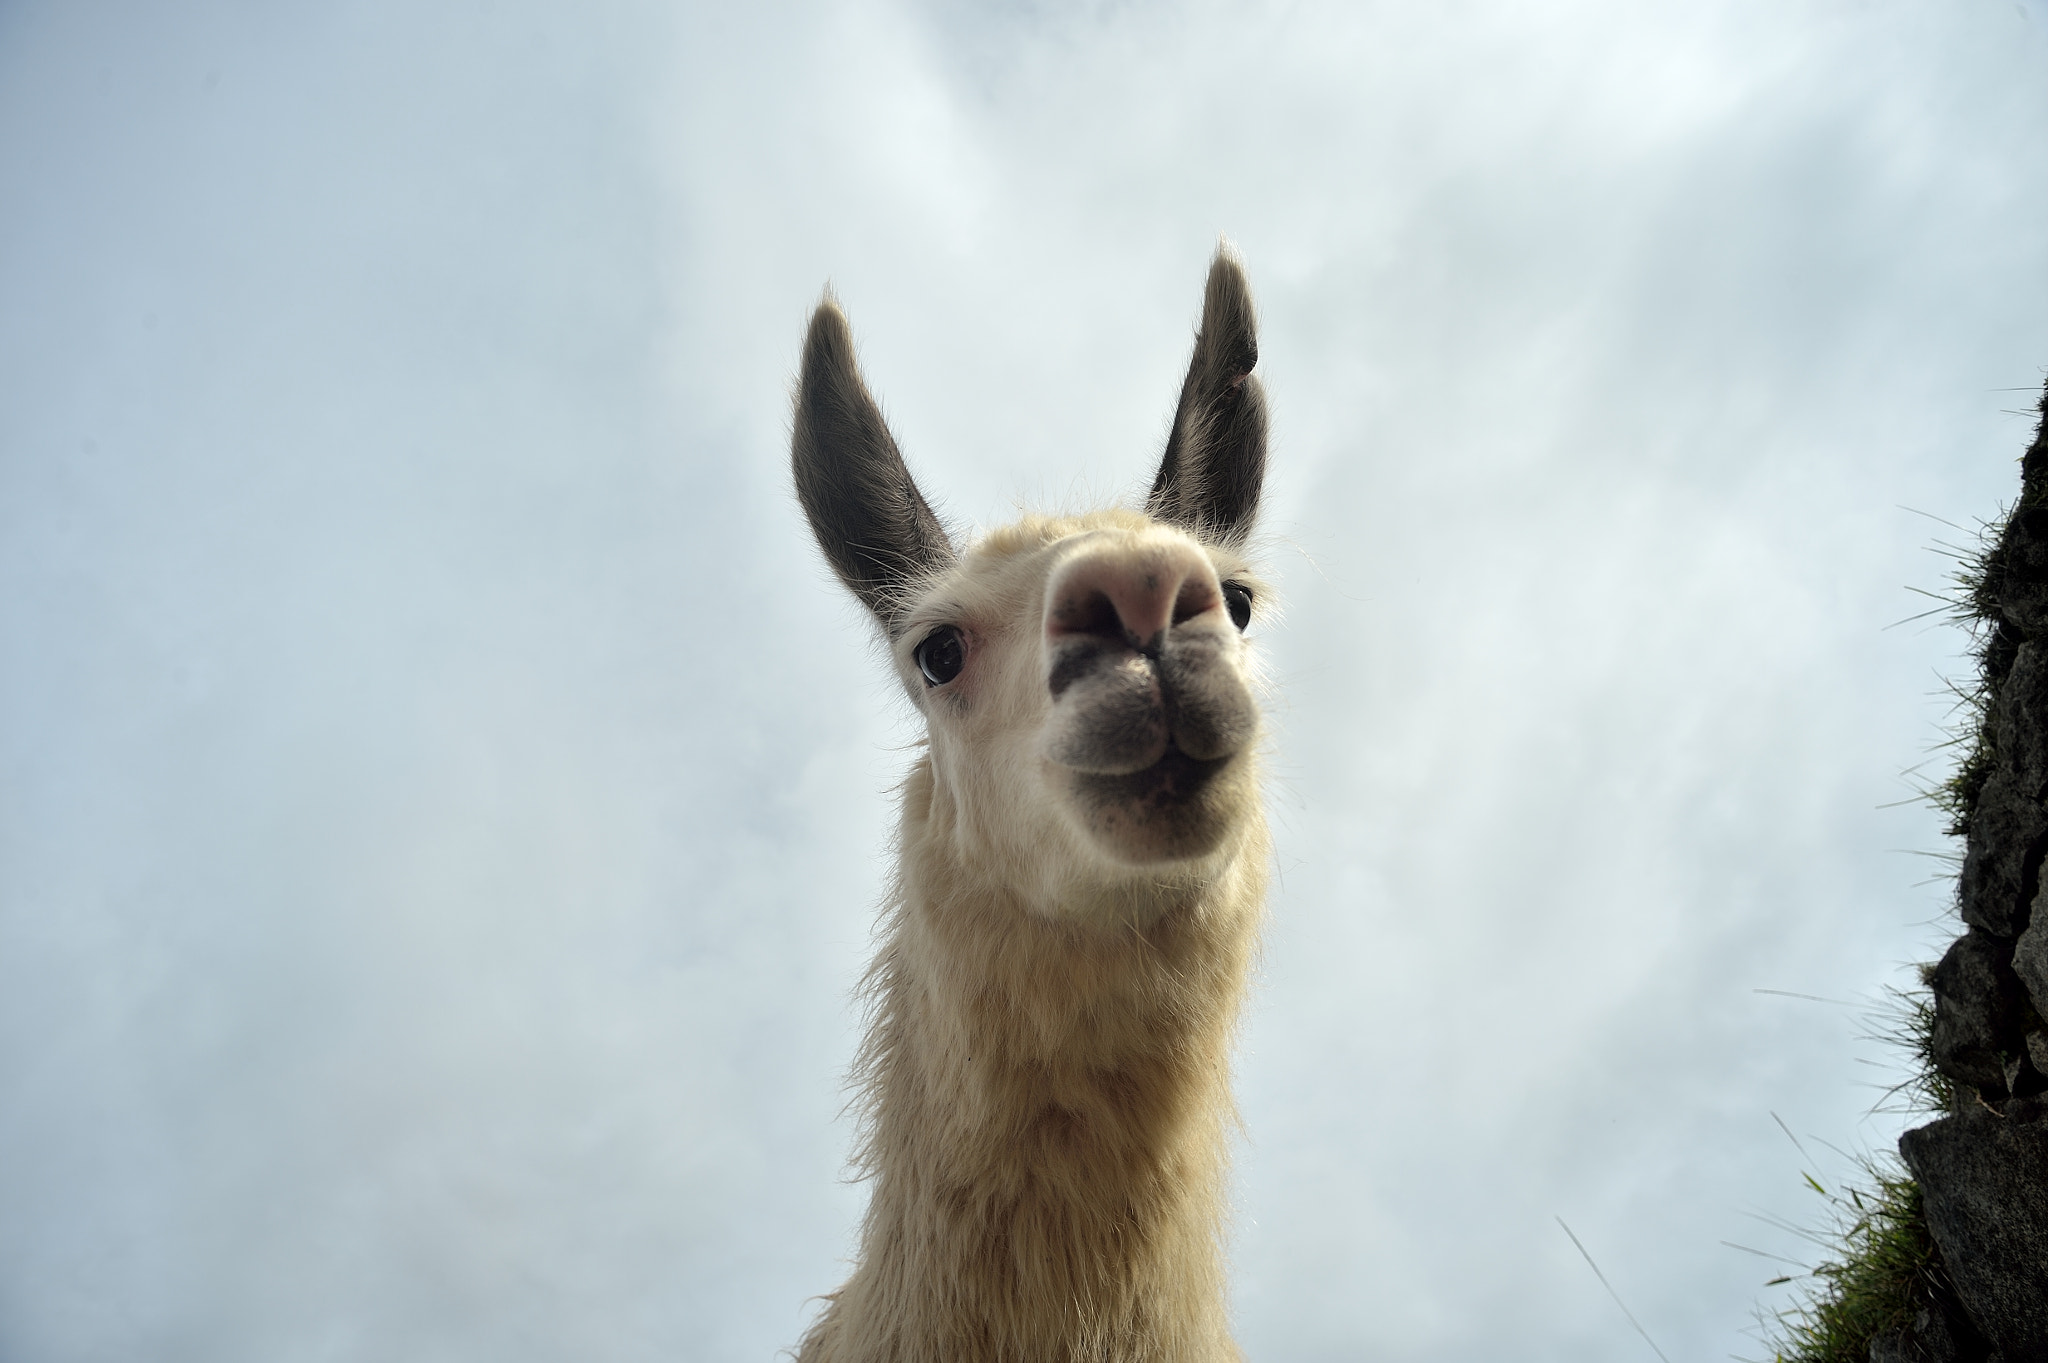 Nikon Df sample photo. Lama: drooled on me right after photography